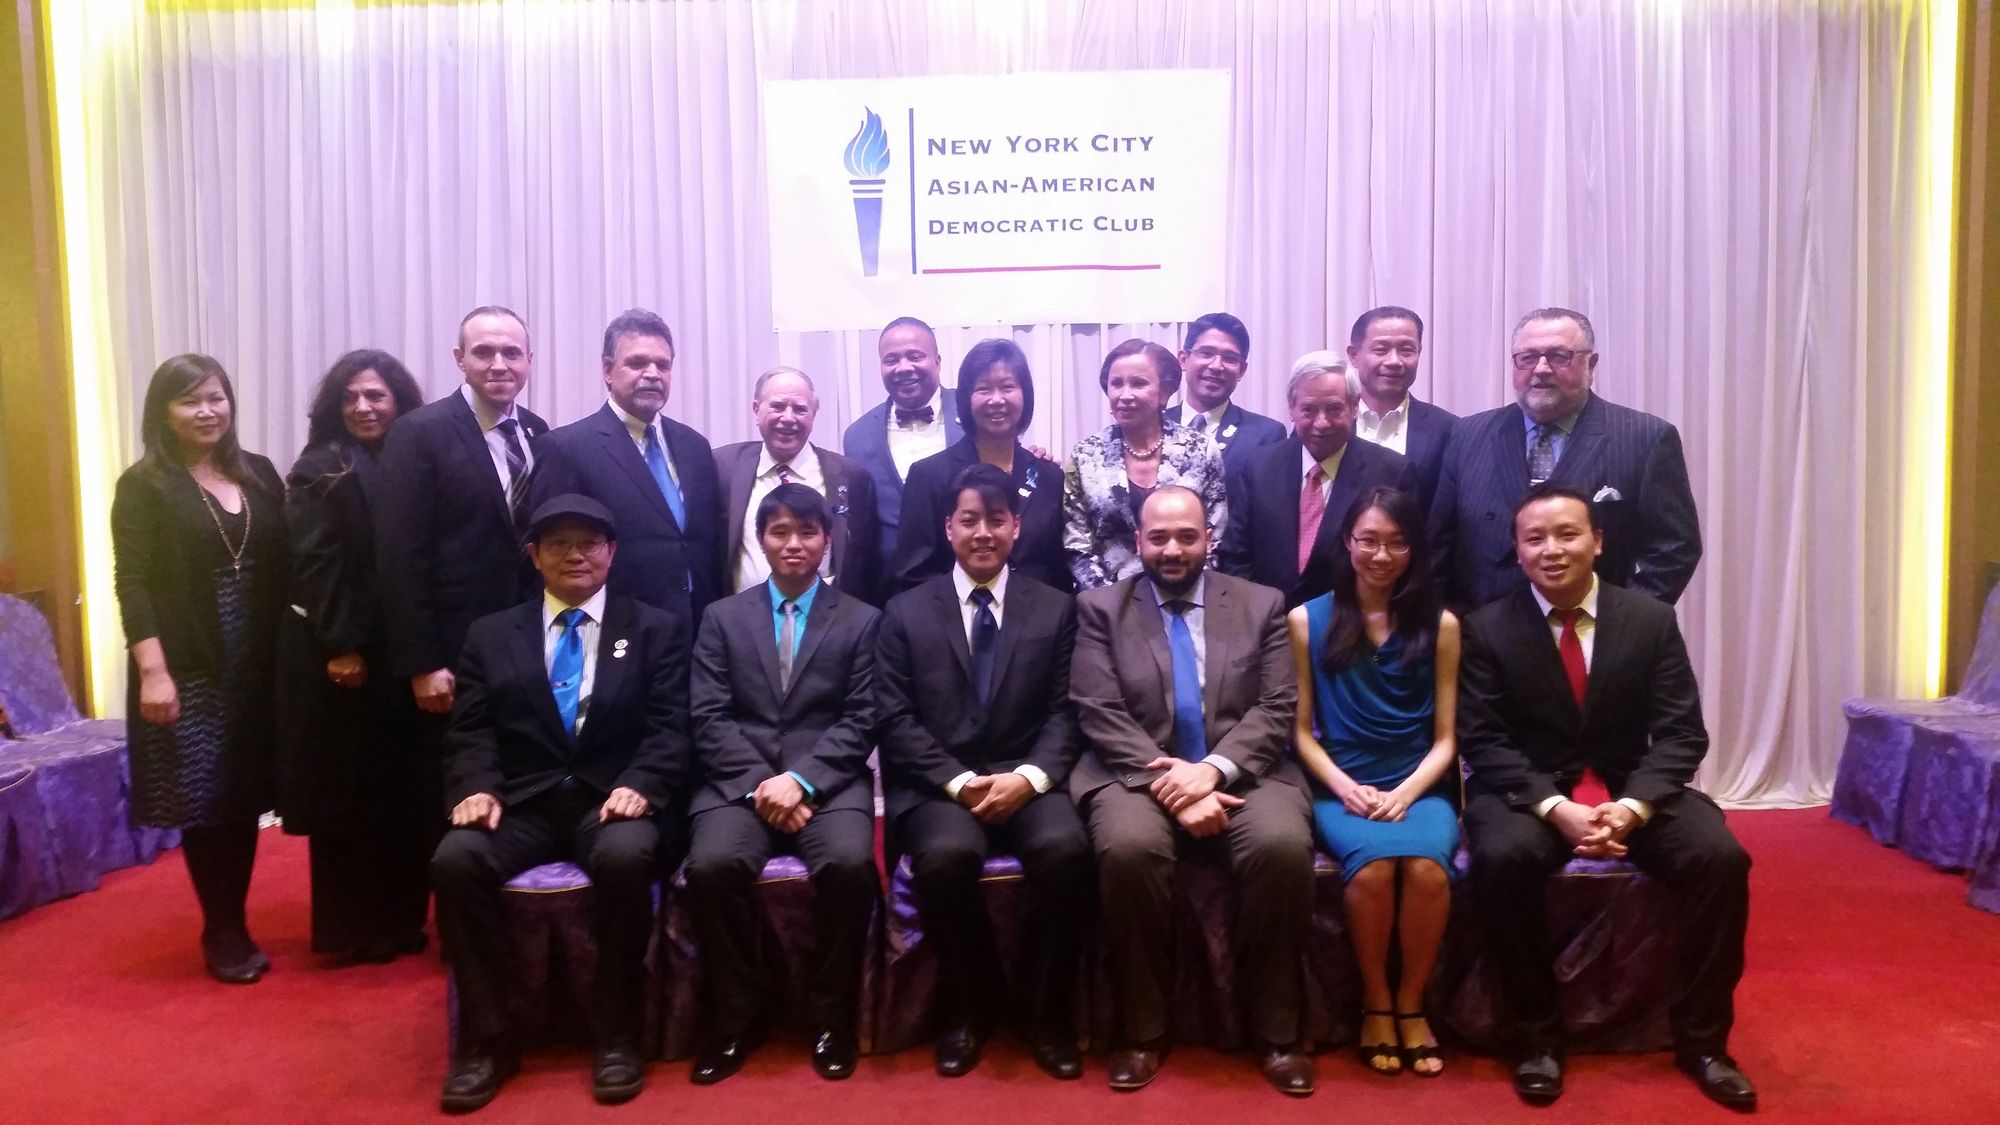 Brooklyn Advocates And Activists Launch NYC Asian American Democratic Club